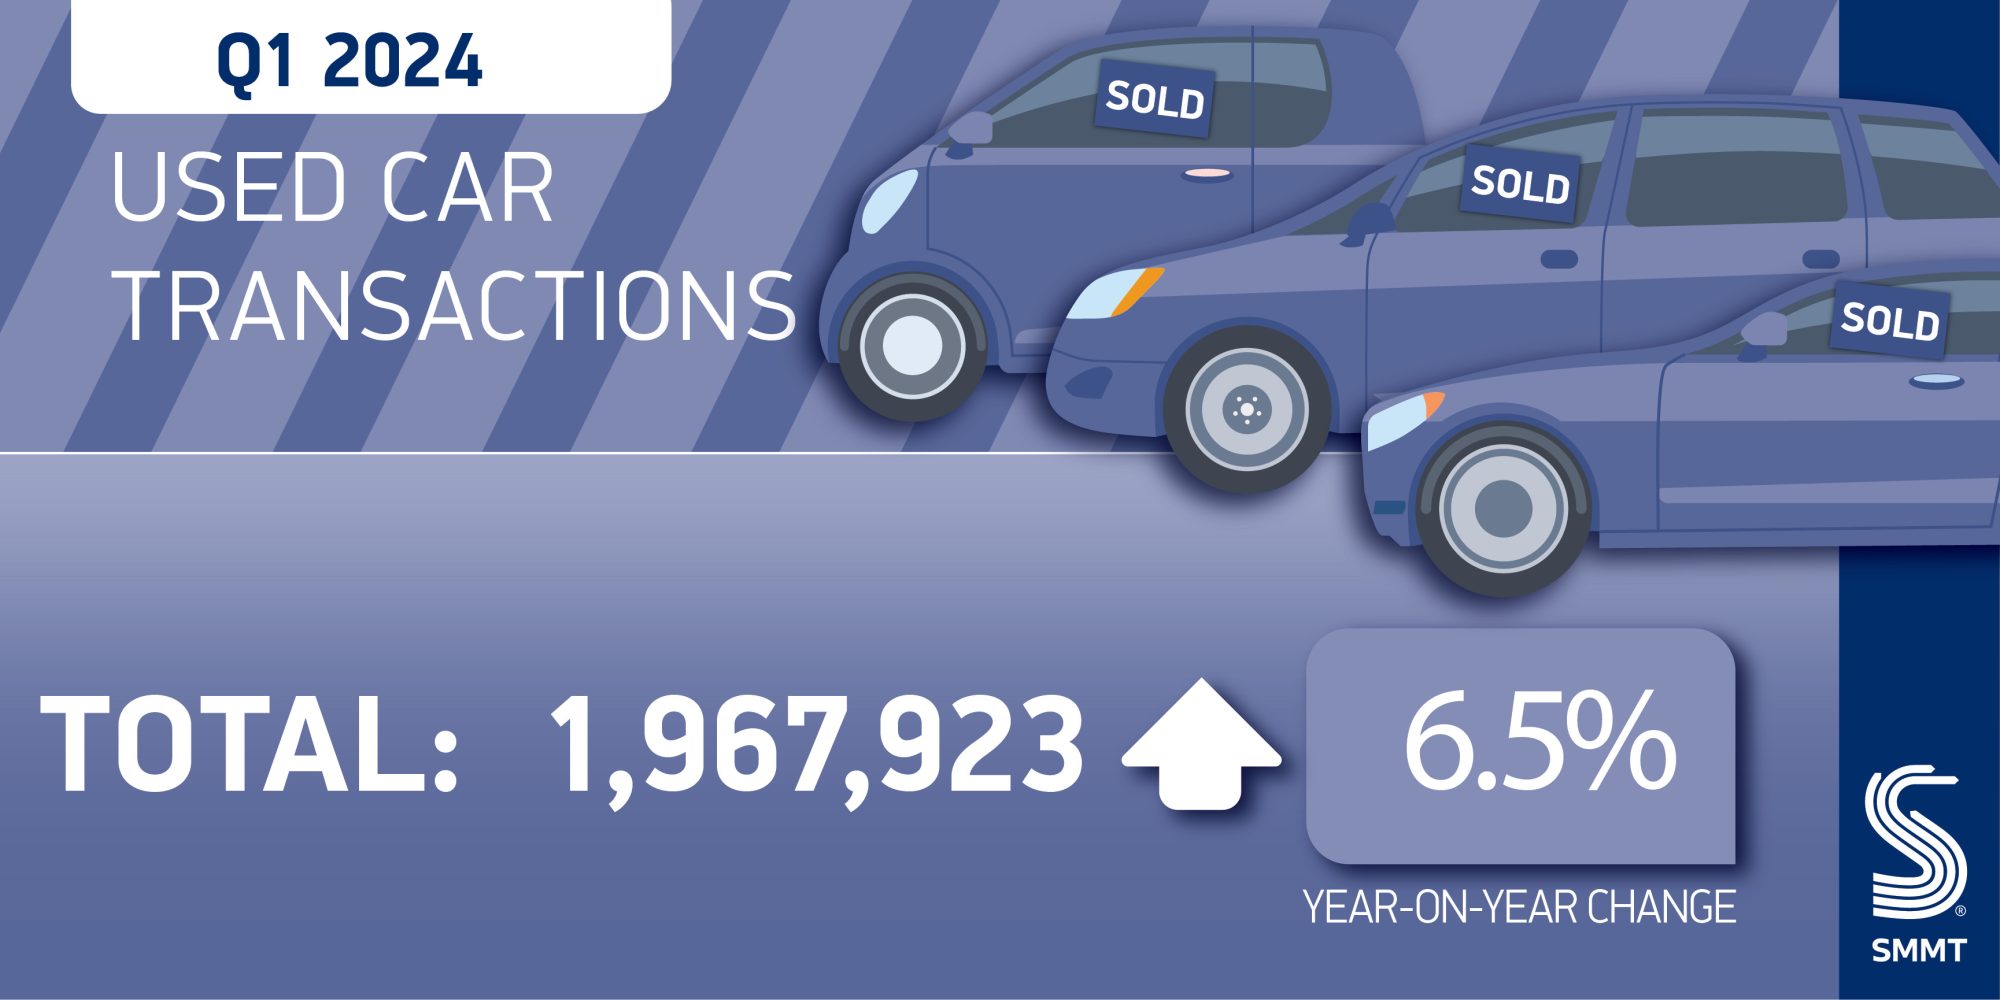 UK’s Used Car Market Enjoys Robust Growth in Early 2024